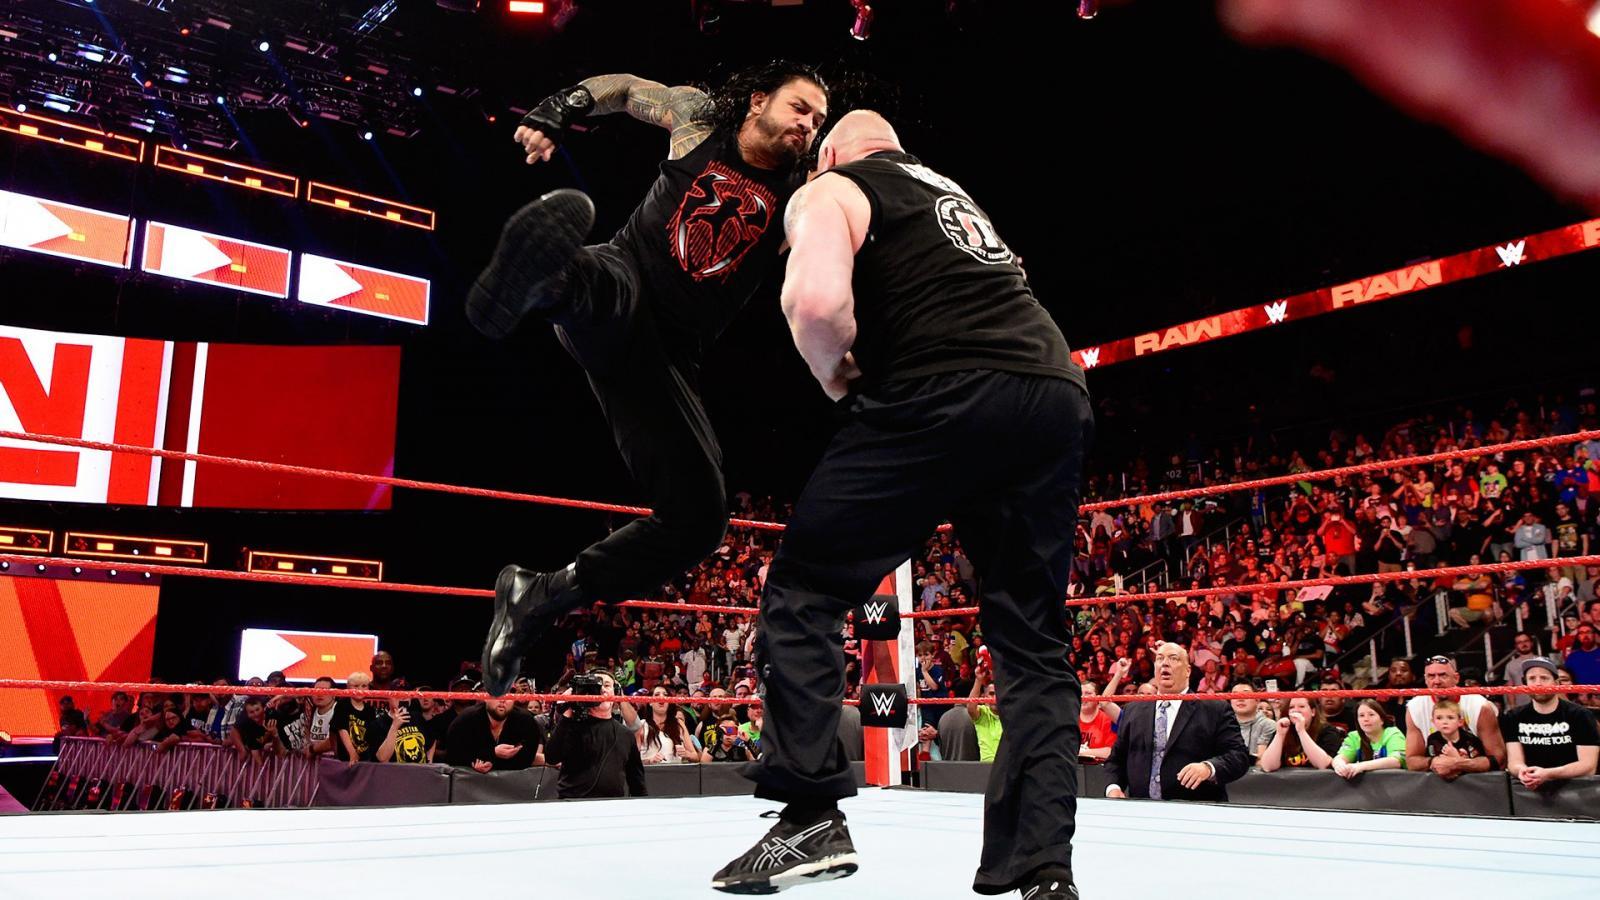 Roman Reigns 24 7 Online Raw Results 4 2 18: Five Superman Punches!